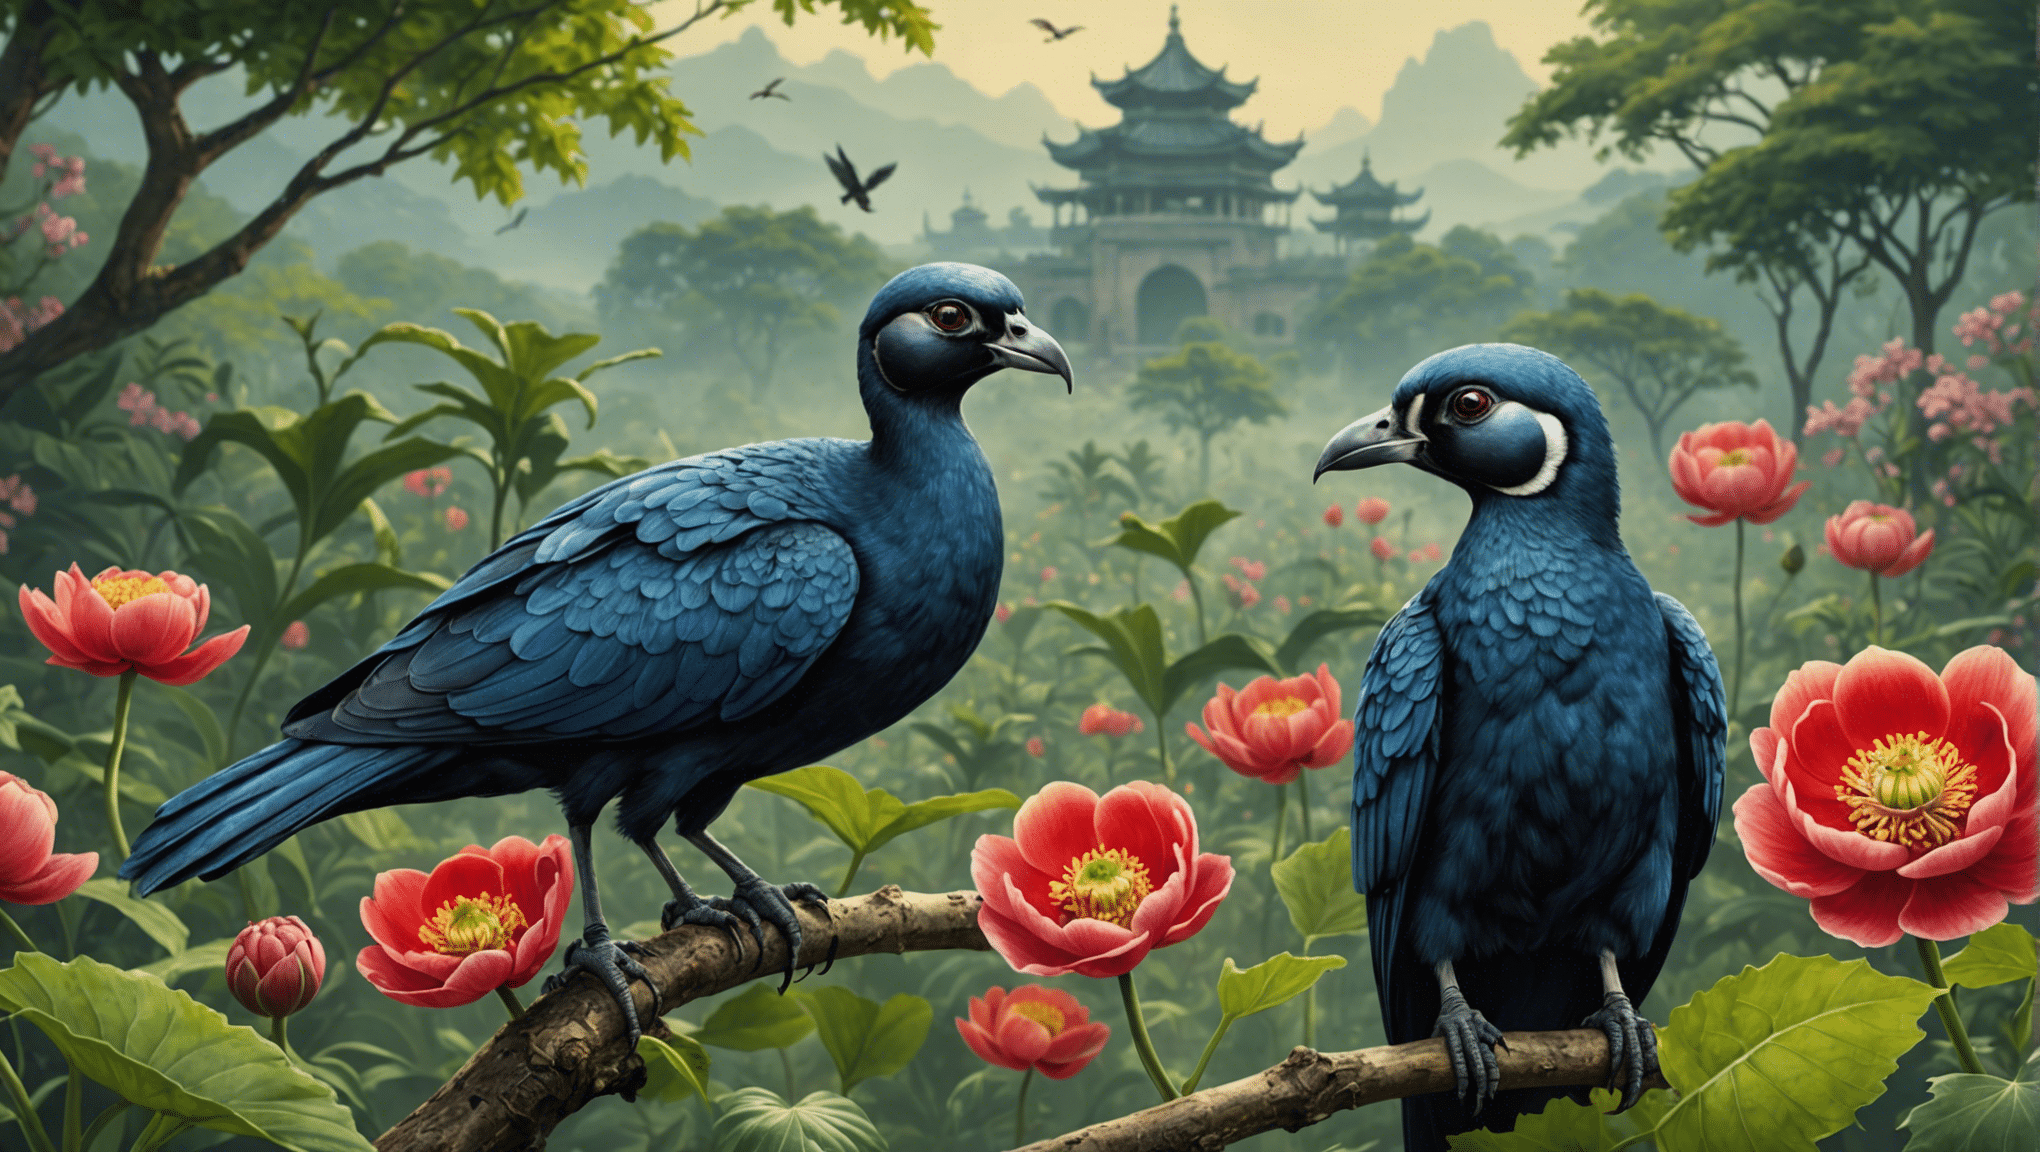 find out the environmental impact of opium birds and whether they pose a threat to the ecosystem in this informative article.